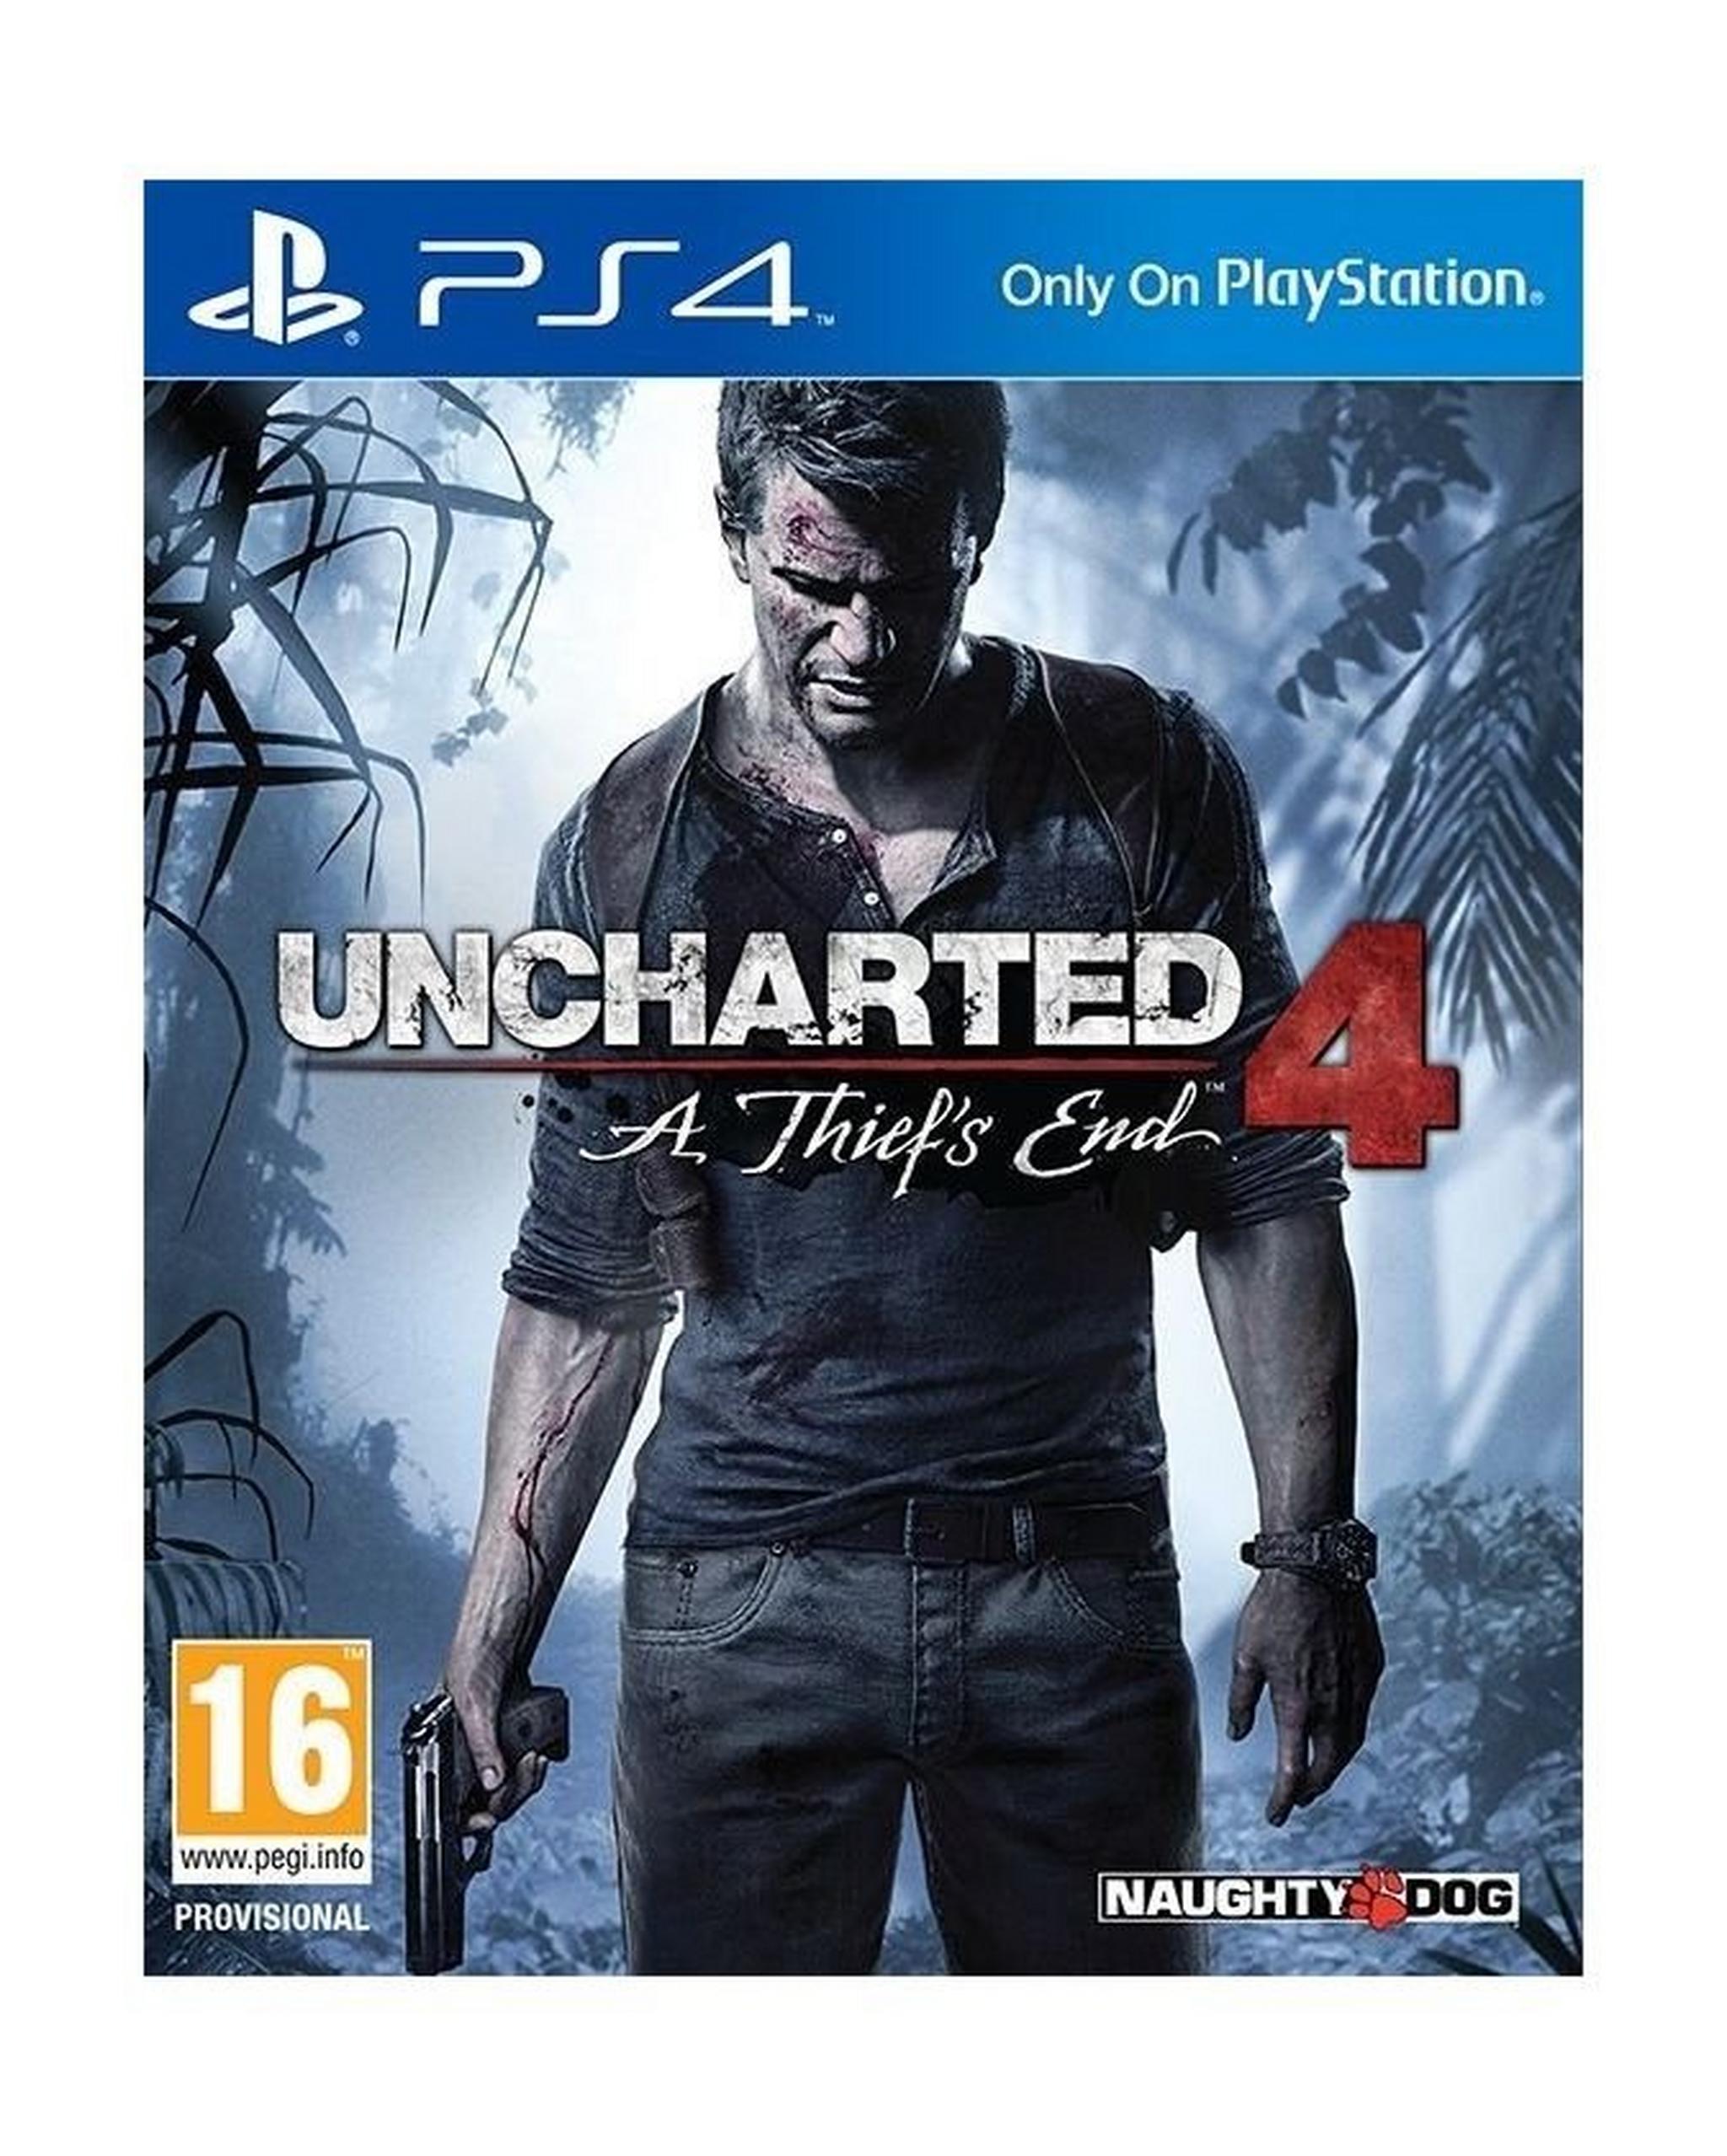 Uncharted 4: A Thief's End - Standard Edition + The Last of Us (Remastered) - PS4 Game